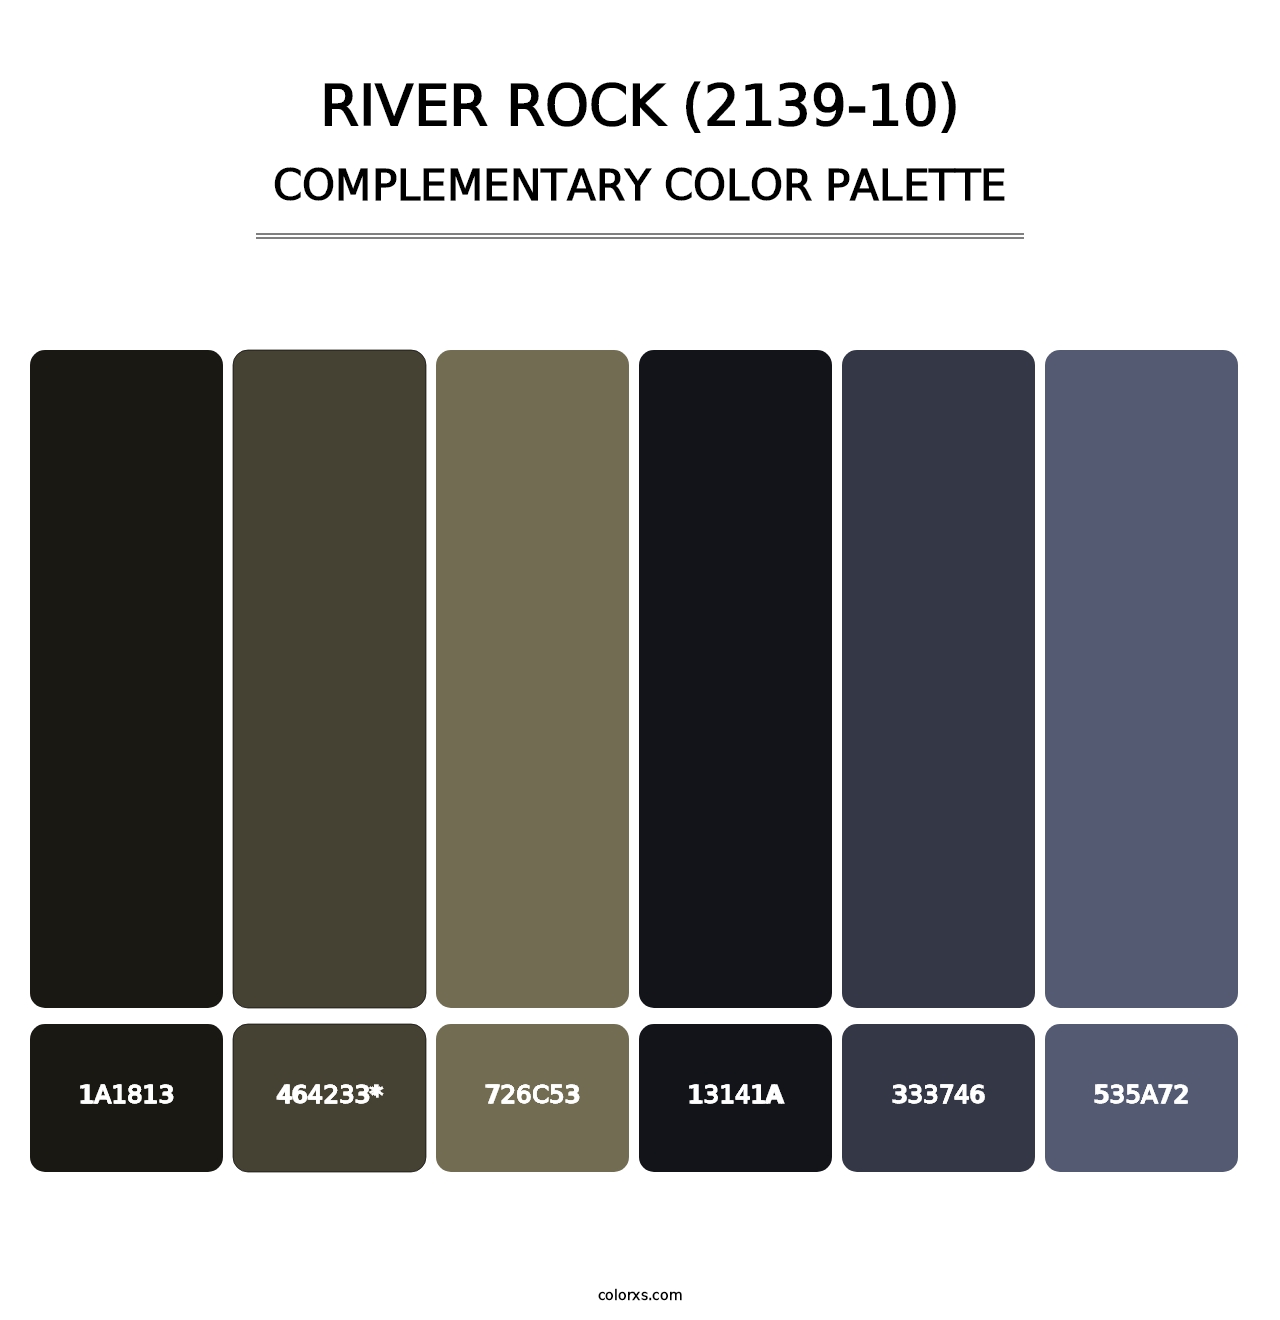 River Rock (2139-10) - Complementary Color Palette